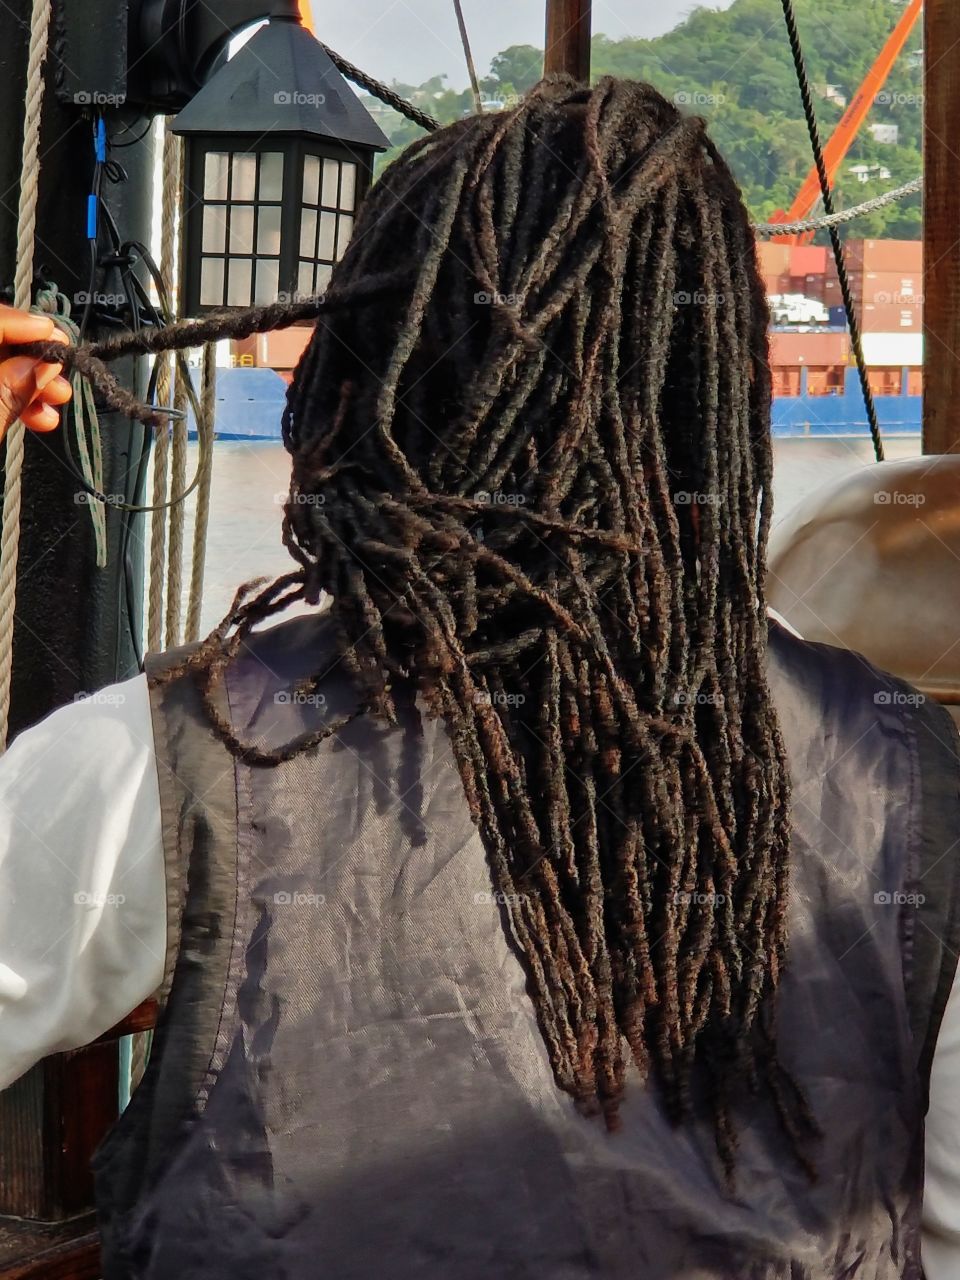 Pirate ship worker with long hairbraids